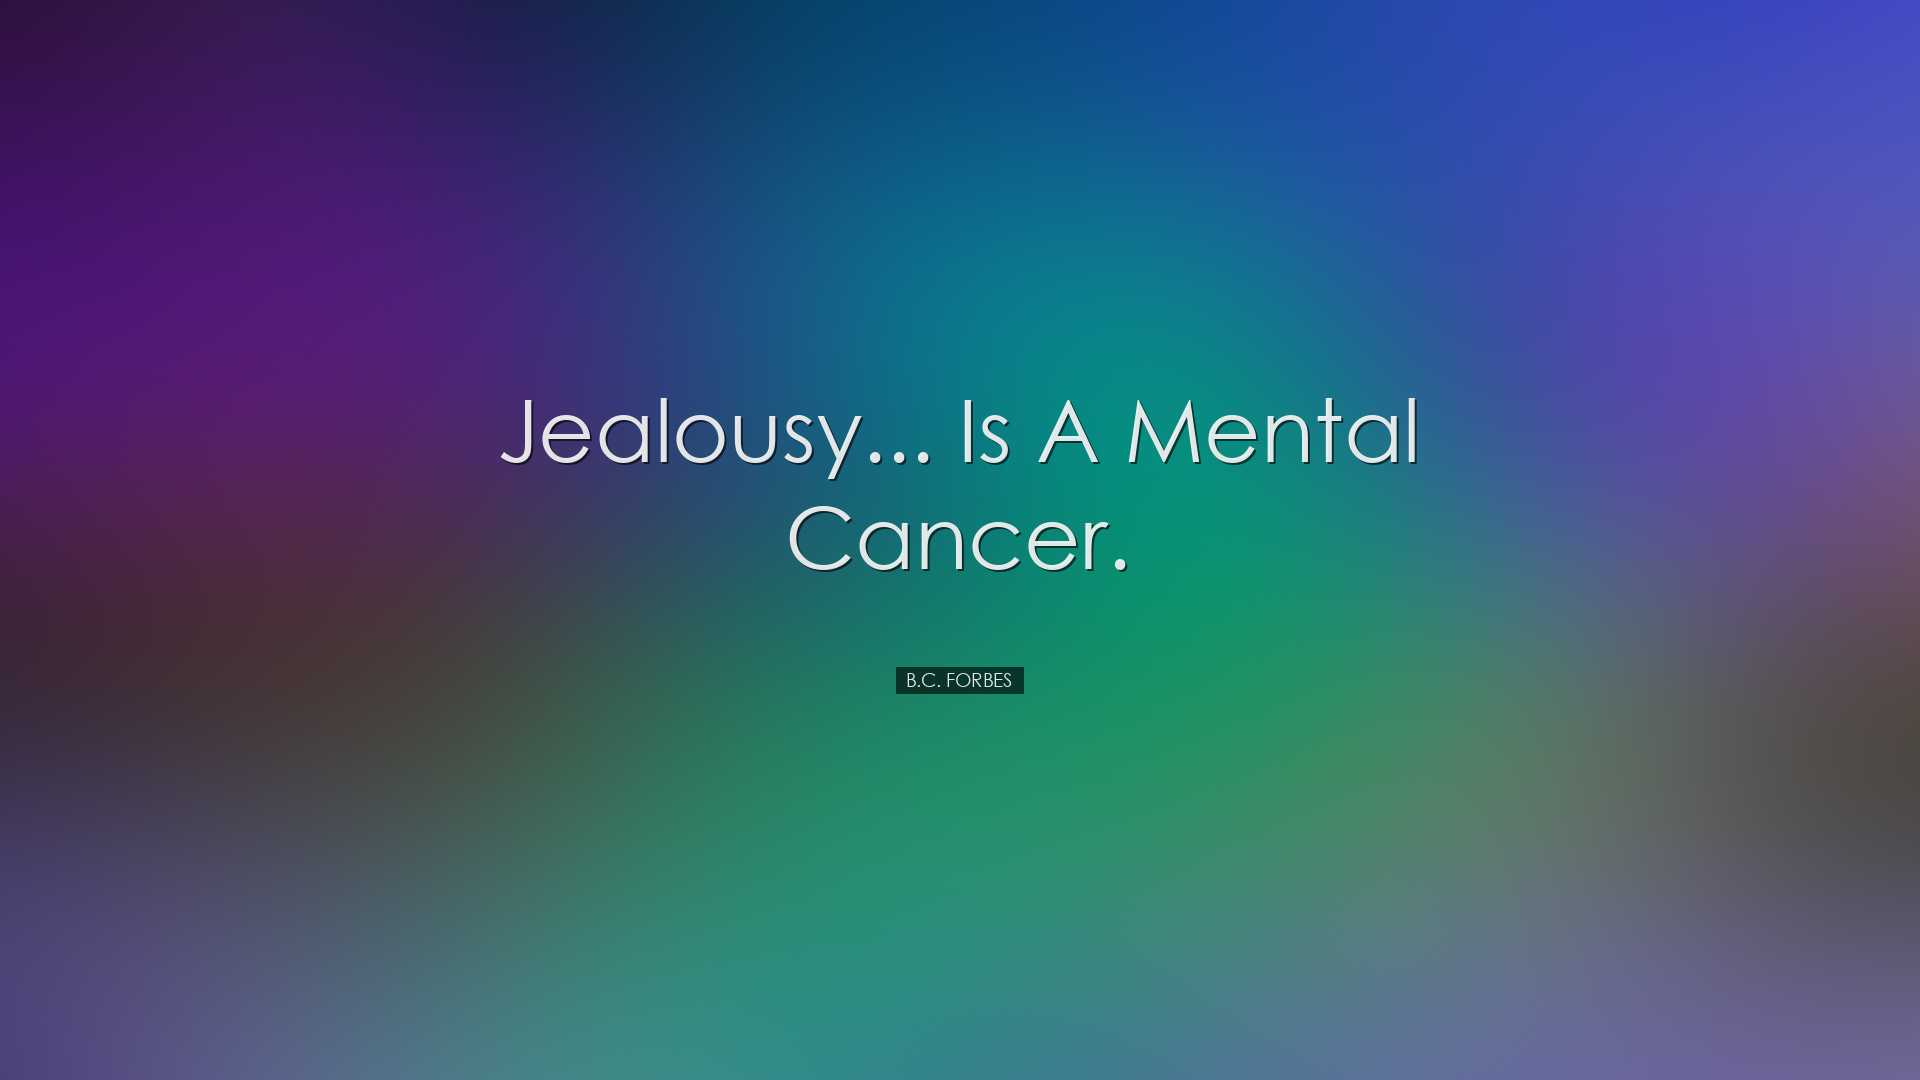 Jealousy... is a mental cancer. - B.C. Forbes